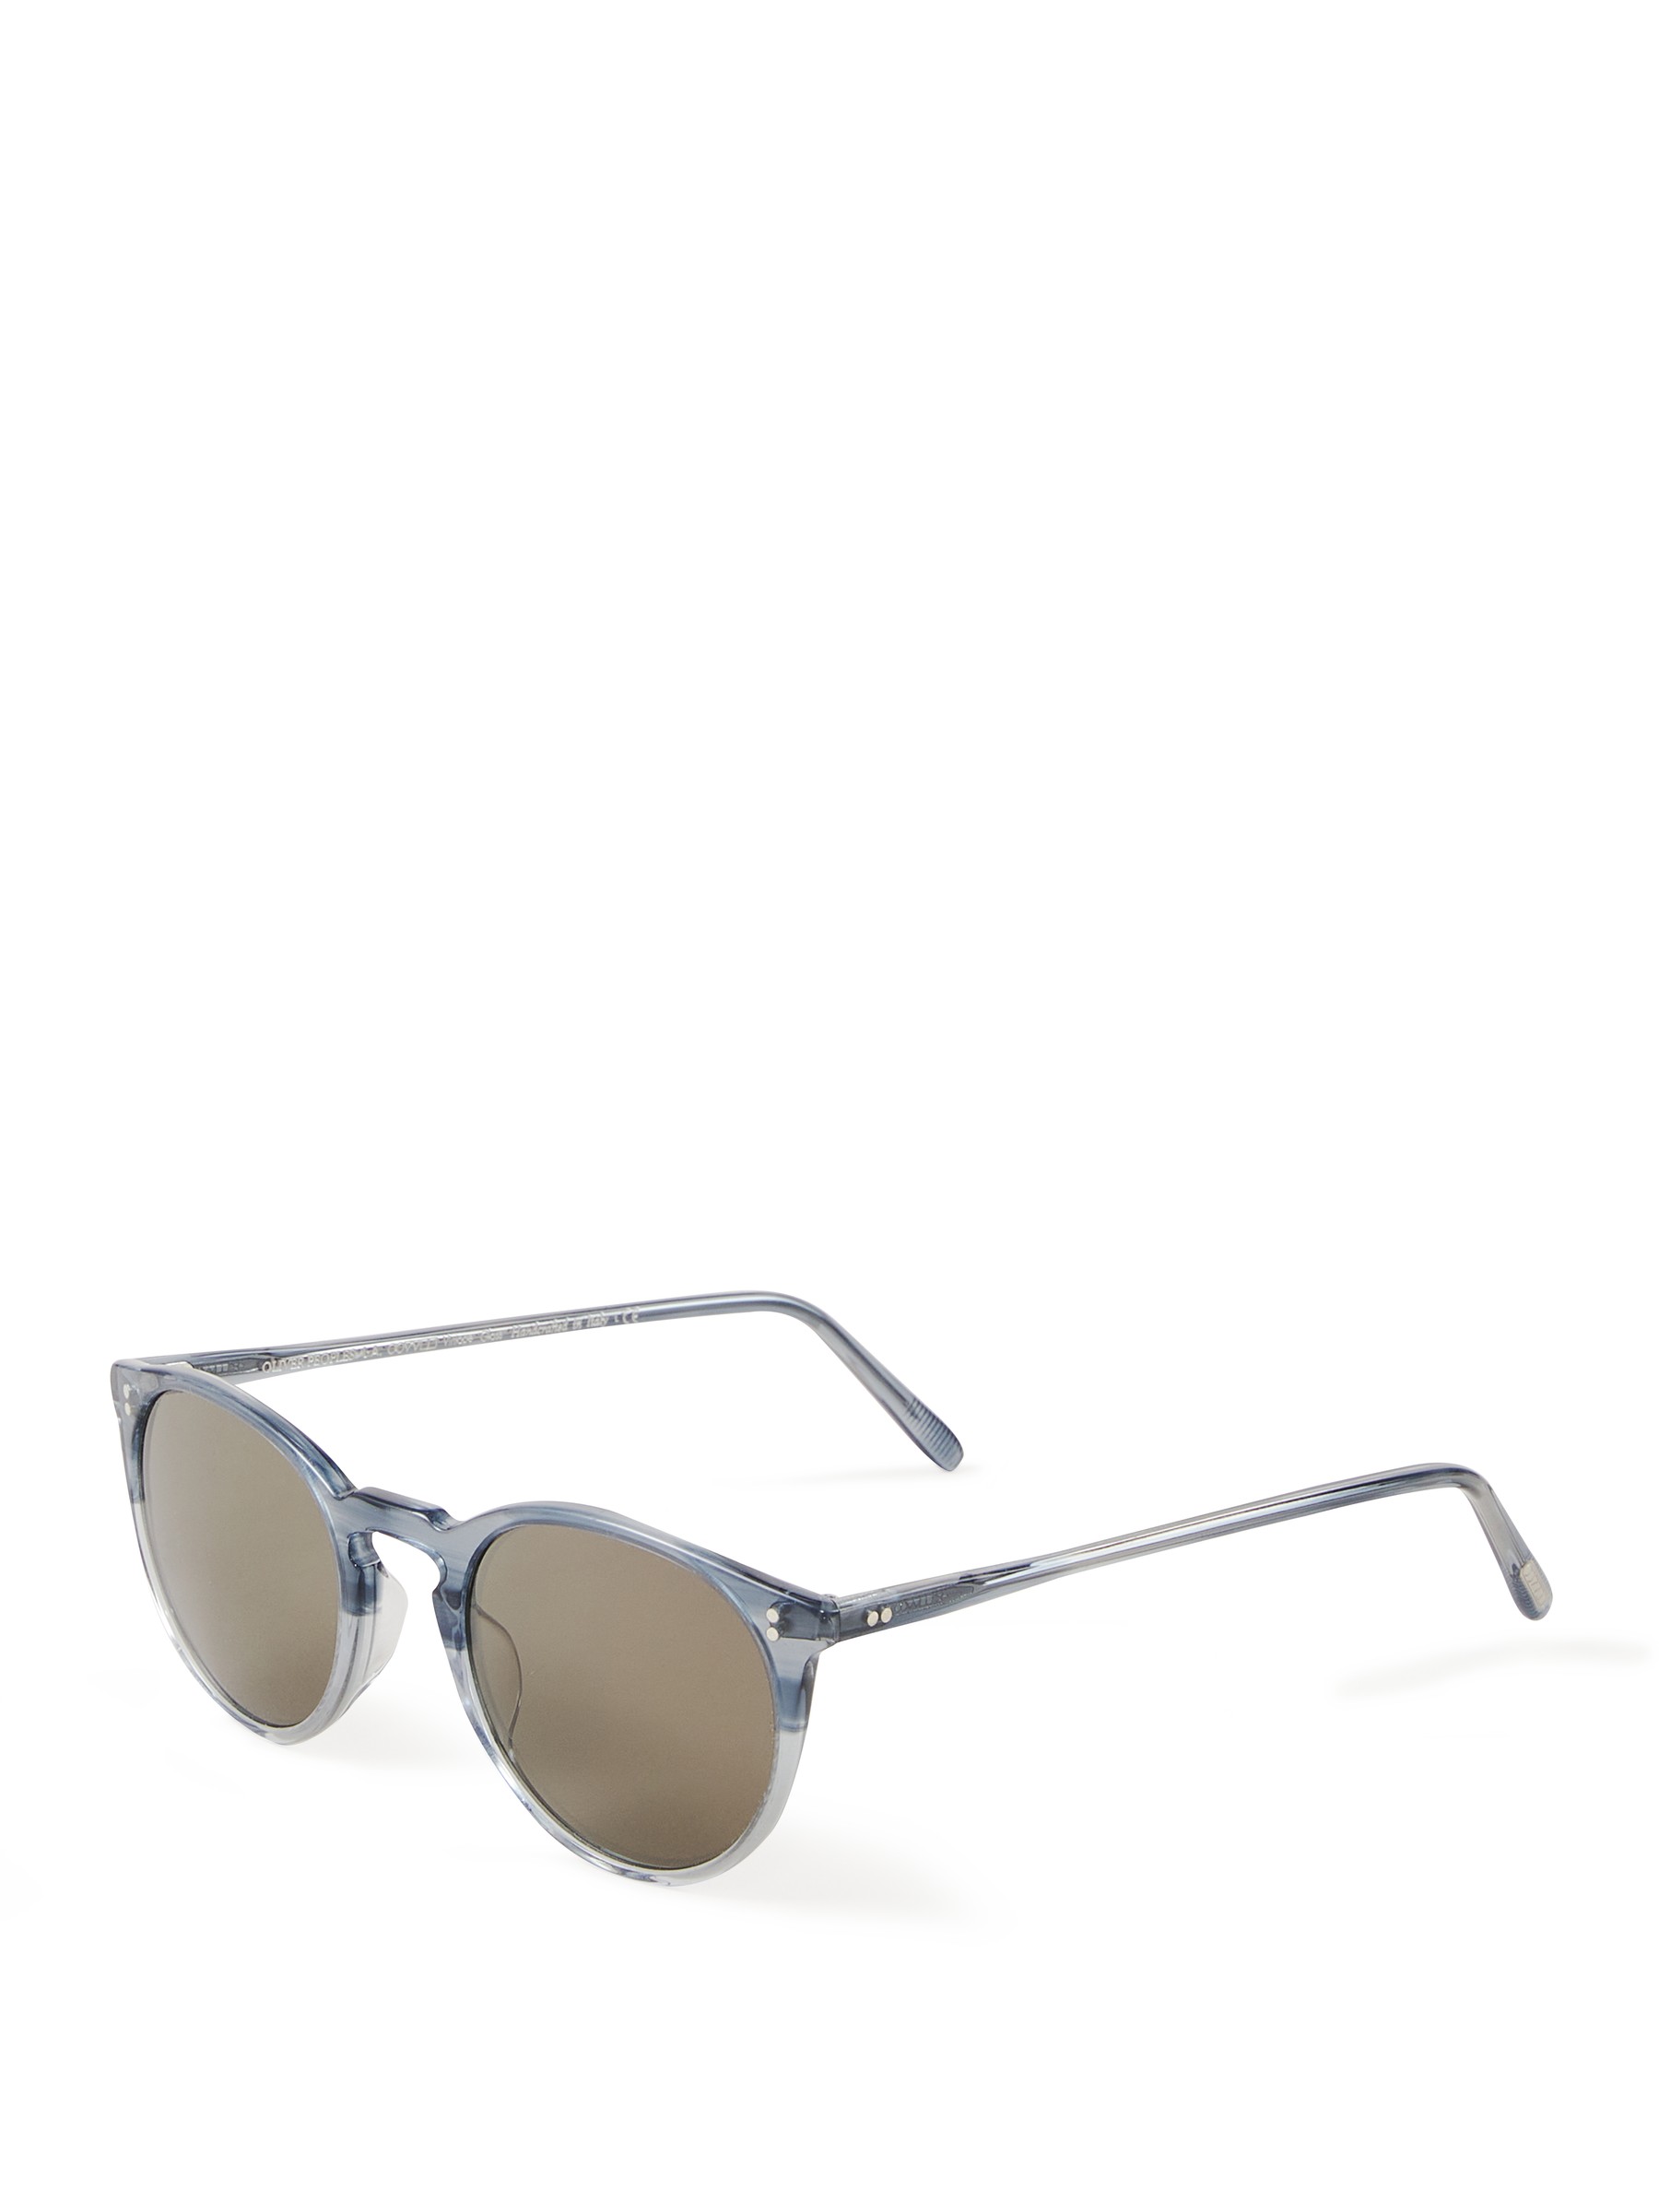 Oliver Peoples Sunglasses 'O'Malley' Blue | Sunglasses